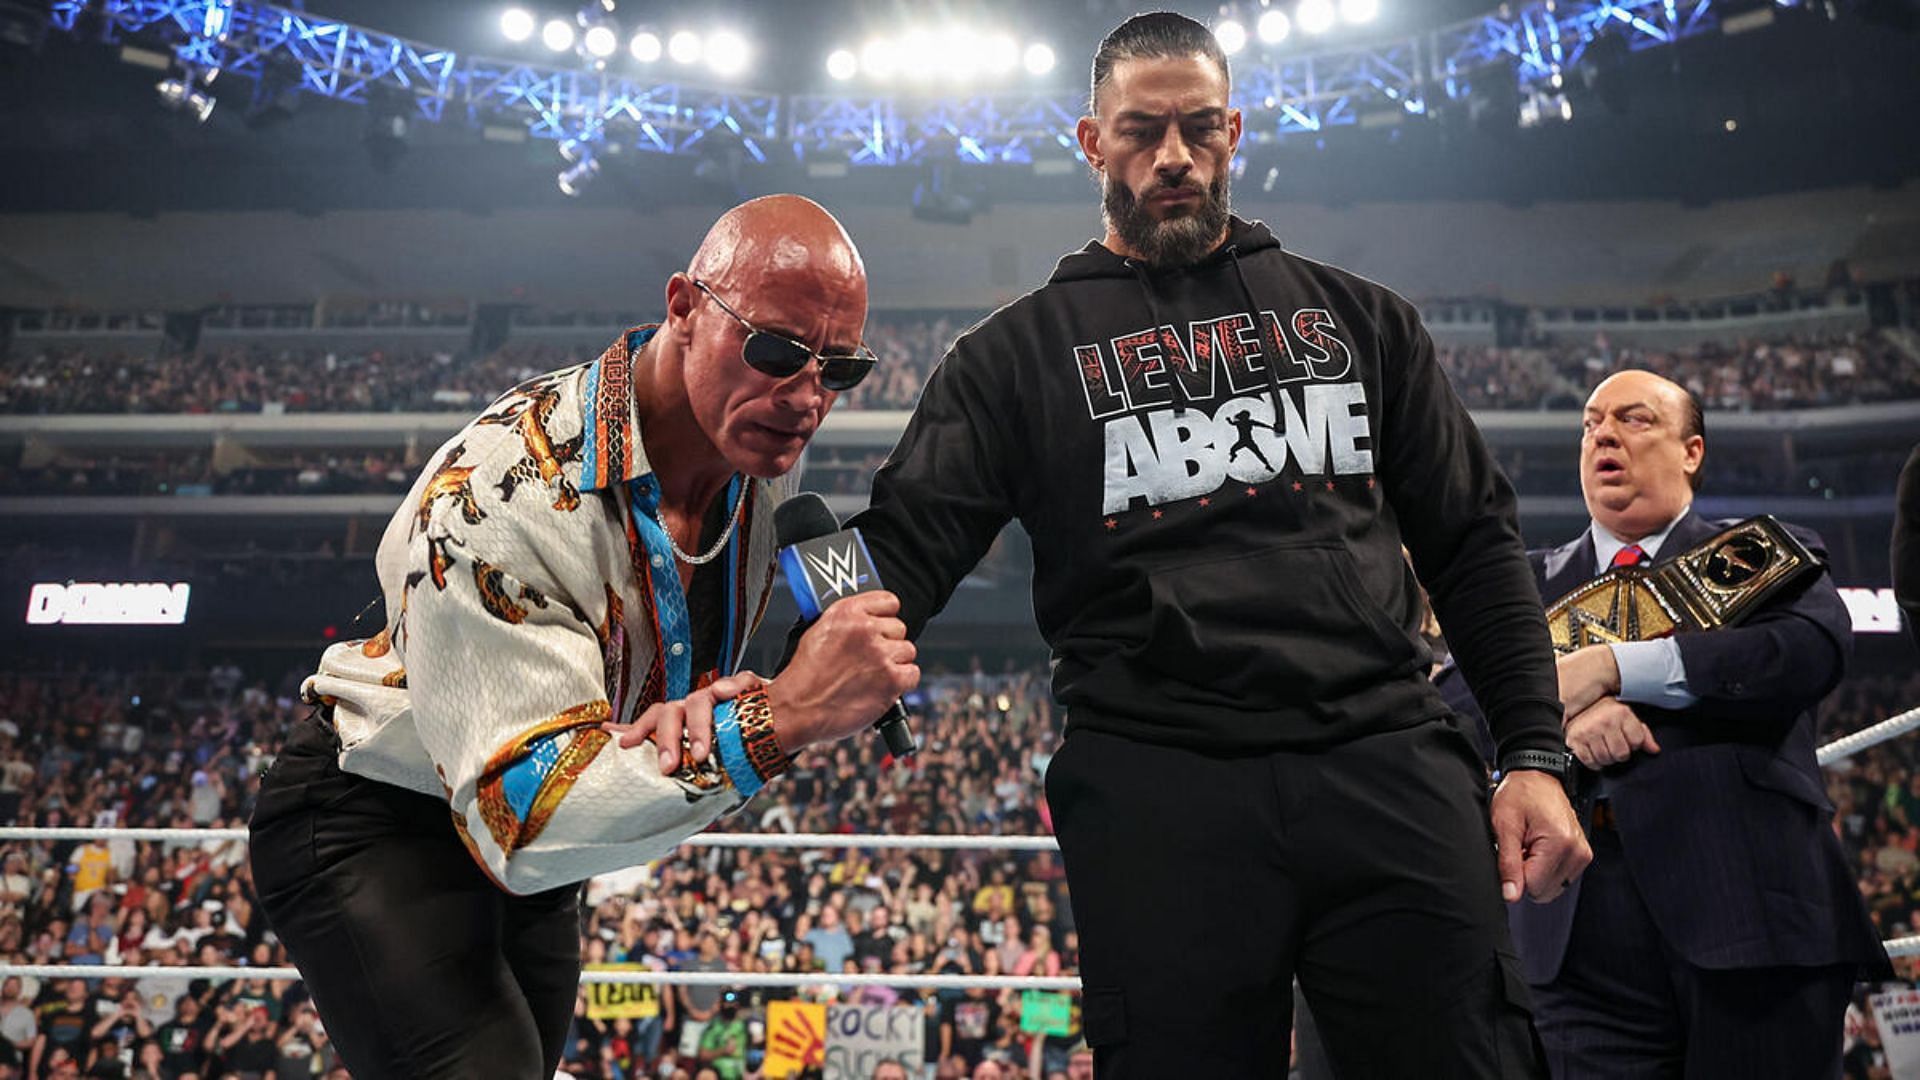 The Rock has acknowledged Roman Reigns as Tribal Chief